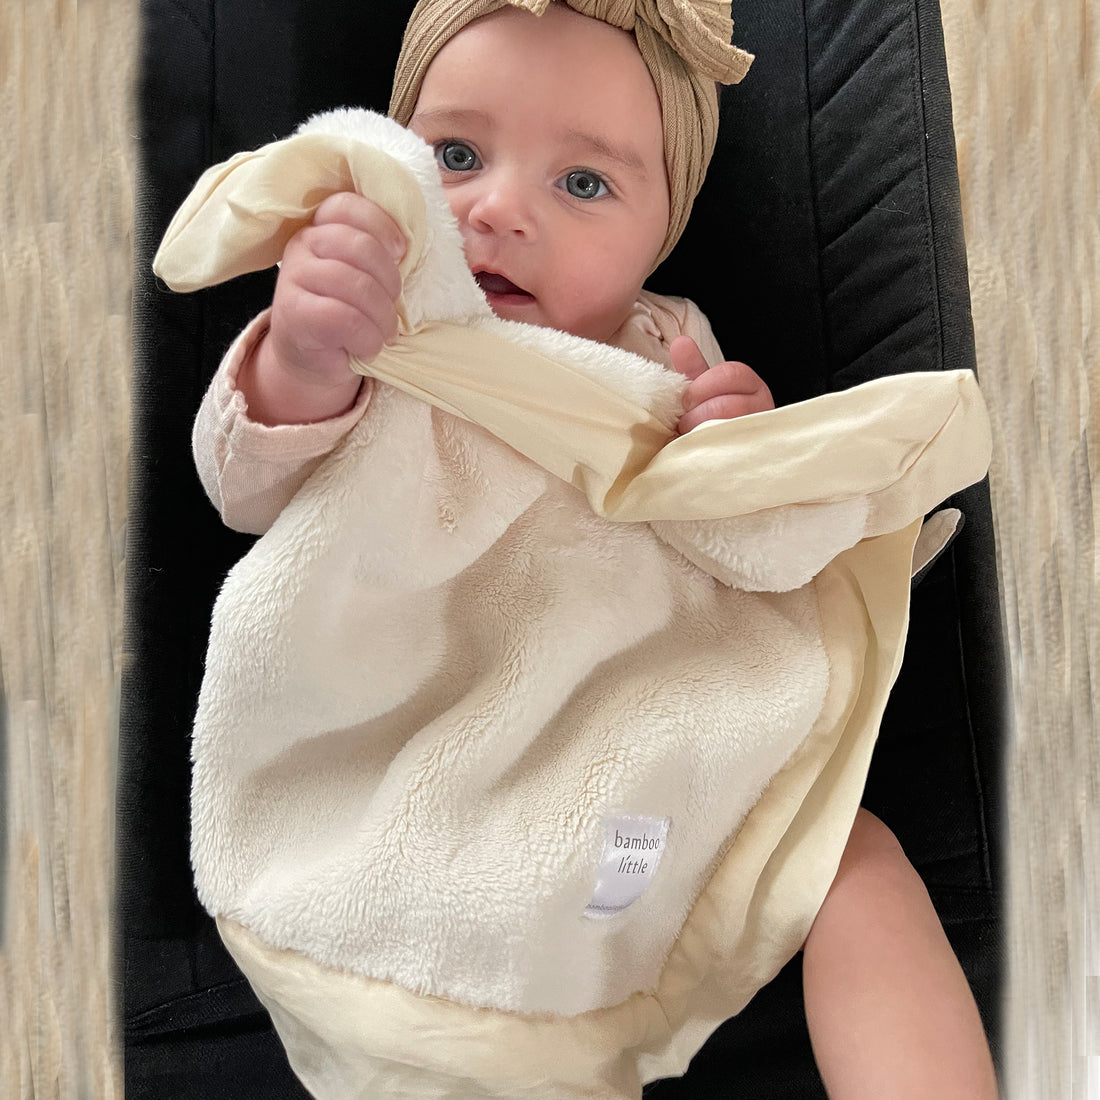 Why Security Blankets are Good for Babies